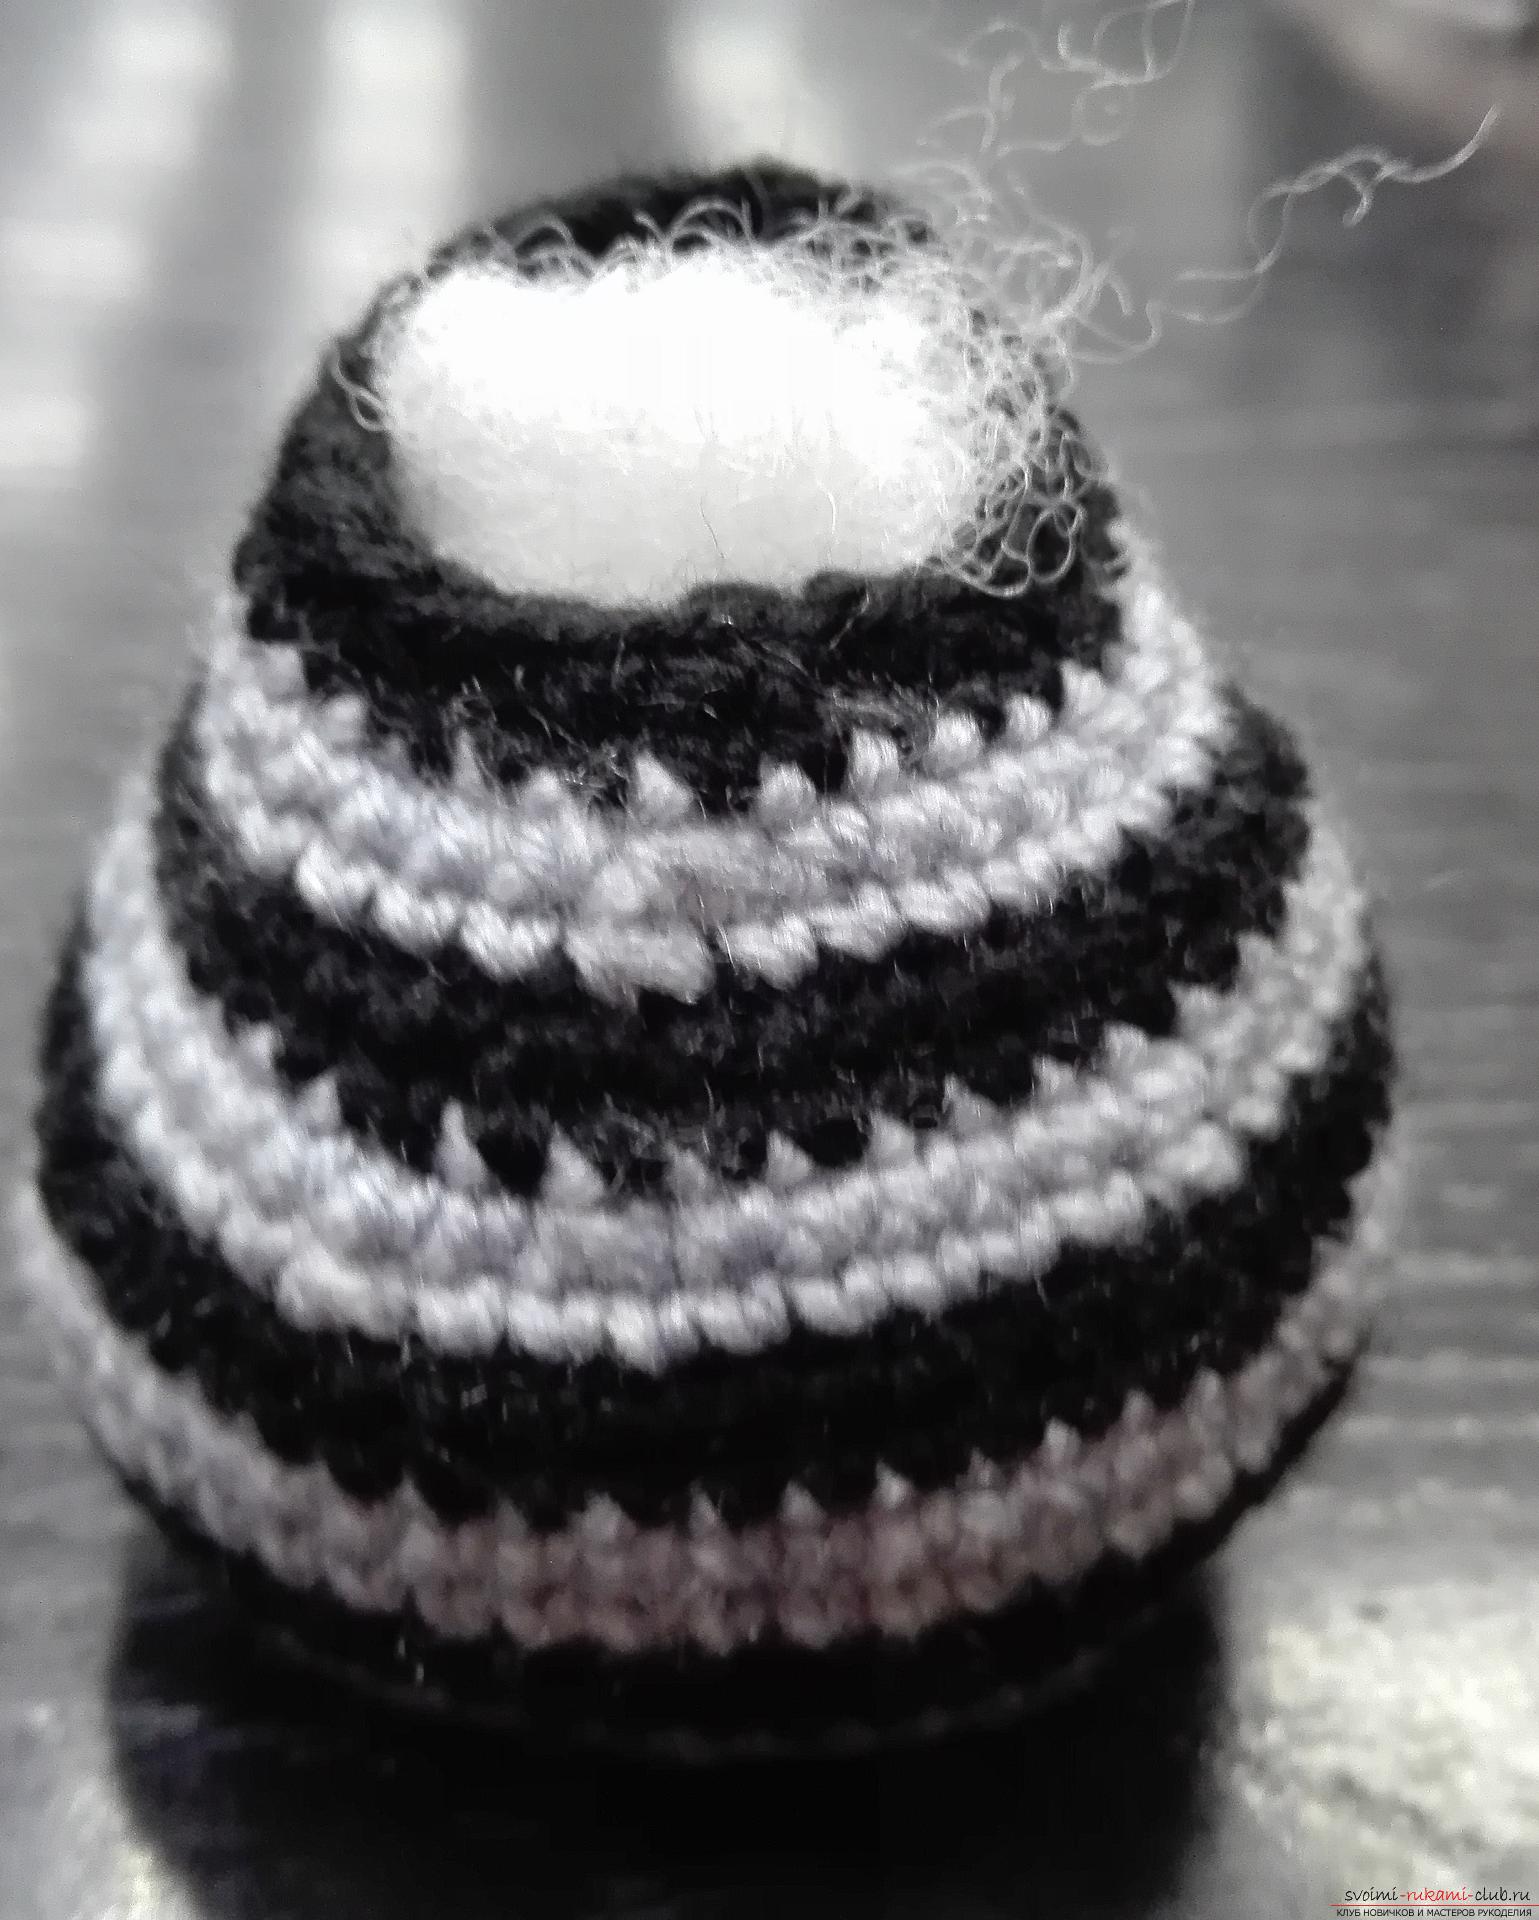 This master class will teach crochet crochet toys, you will be able to create a cat crochet.